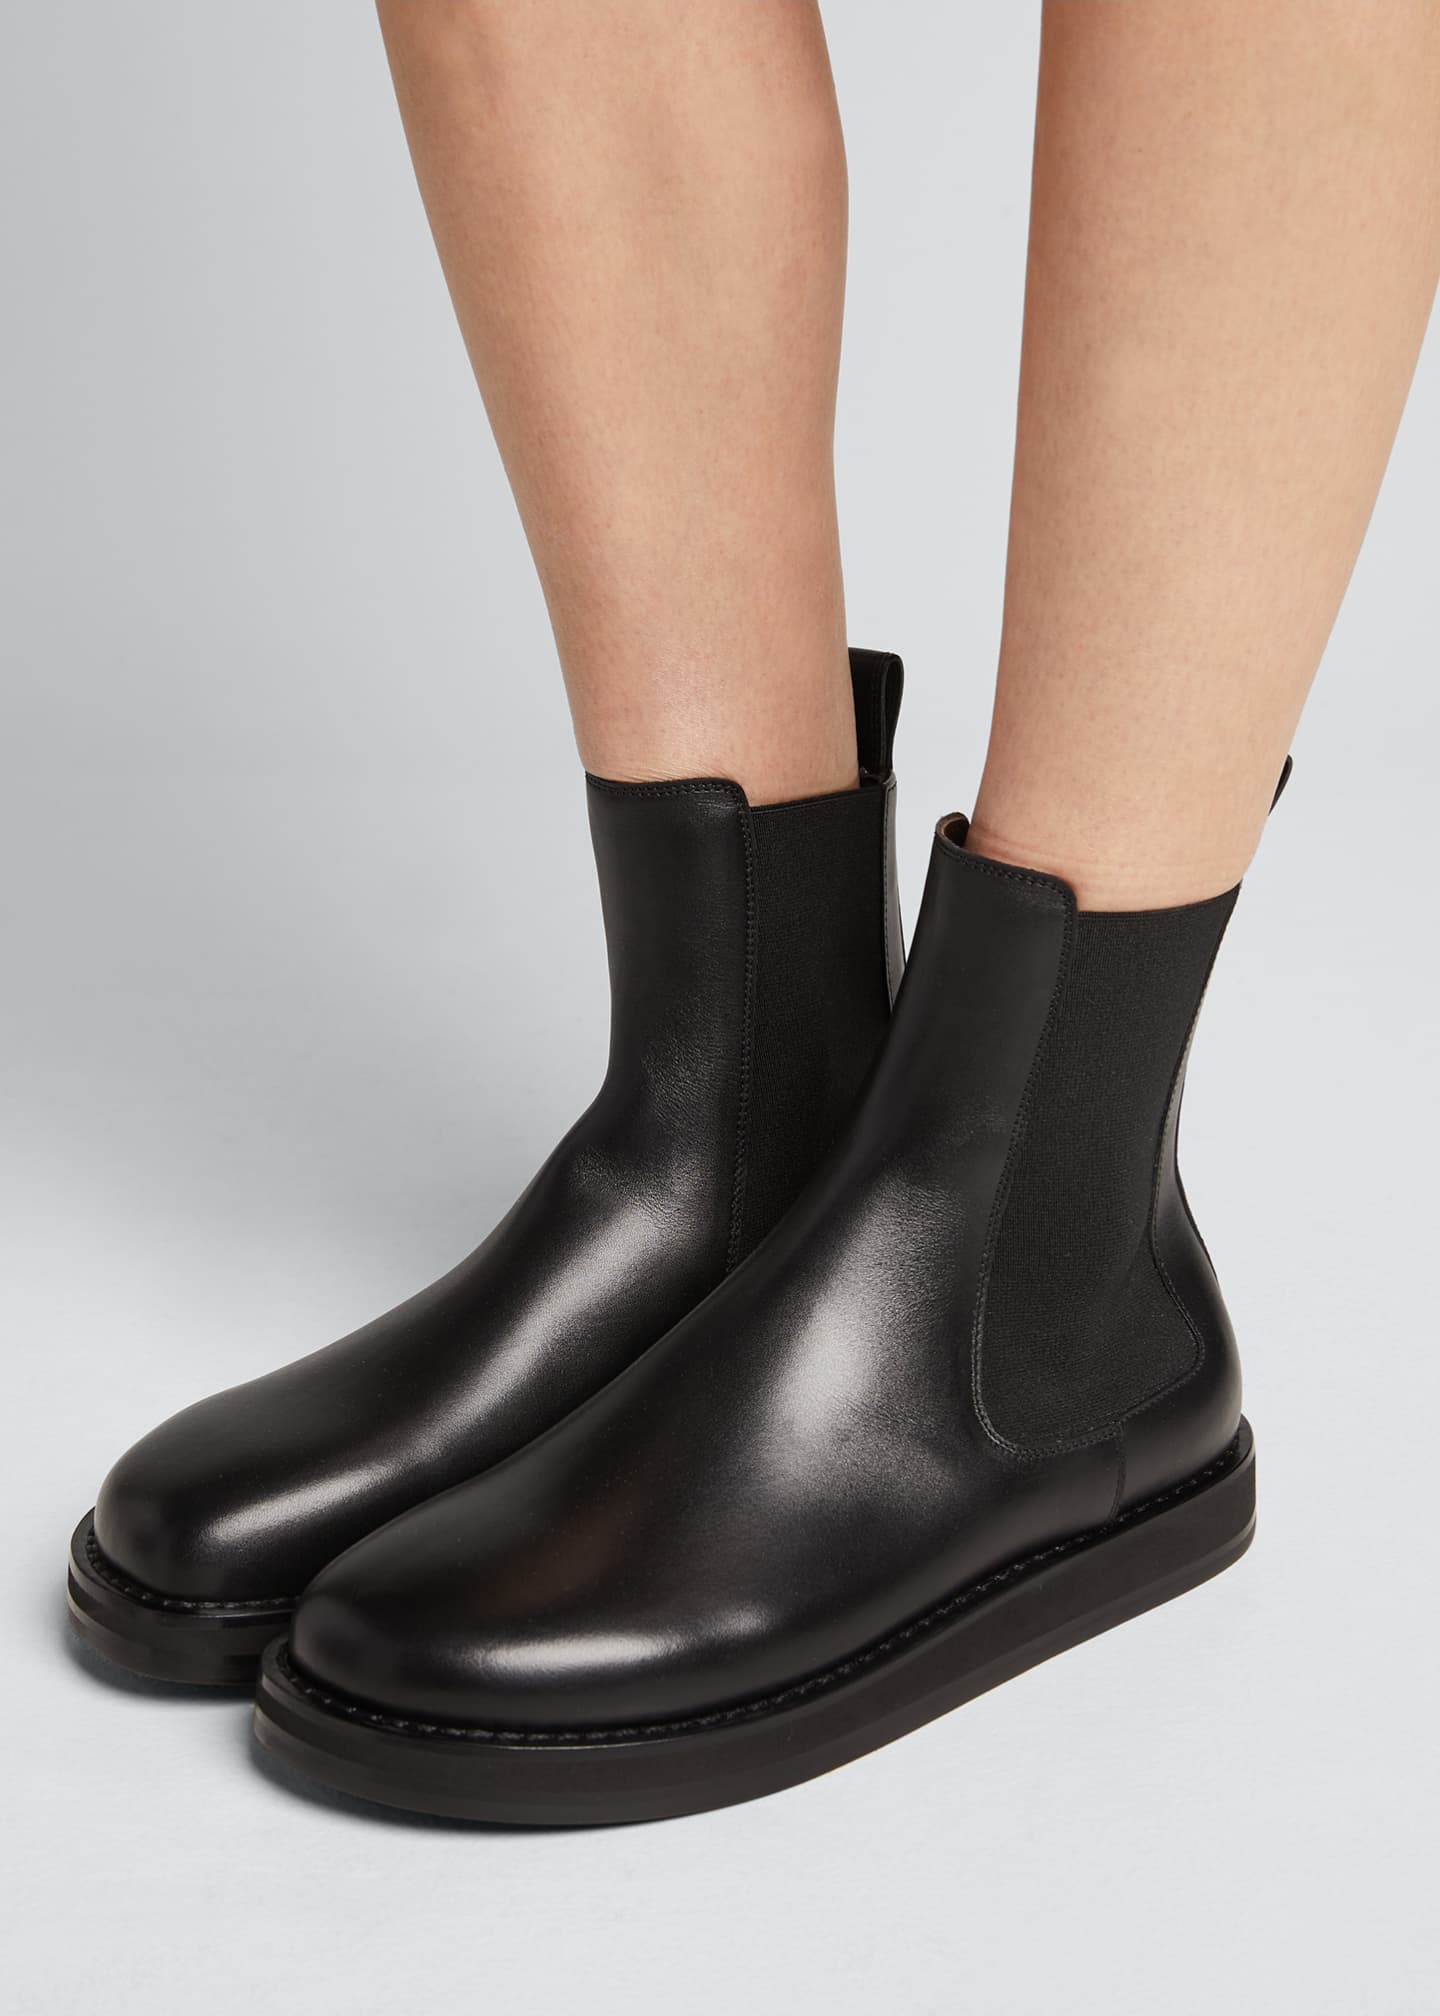 THE ROW Gaia Leather Gored Boots - Bergdorf Goodman